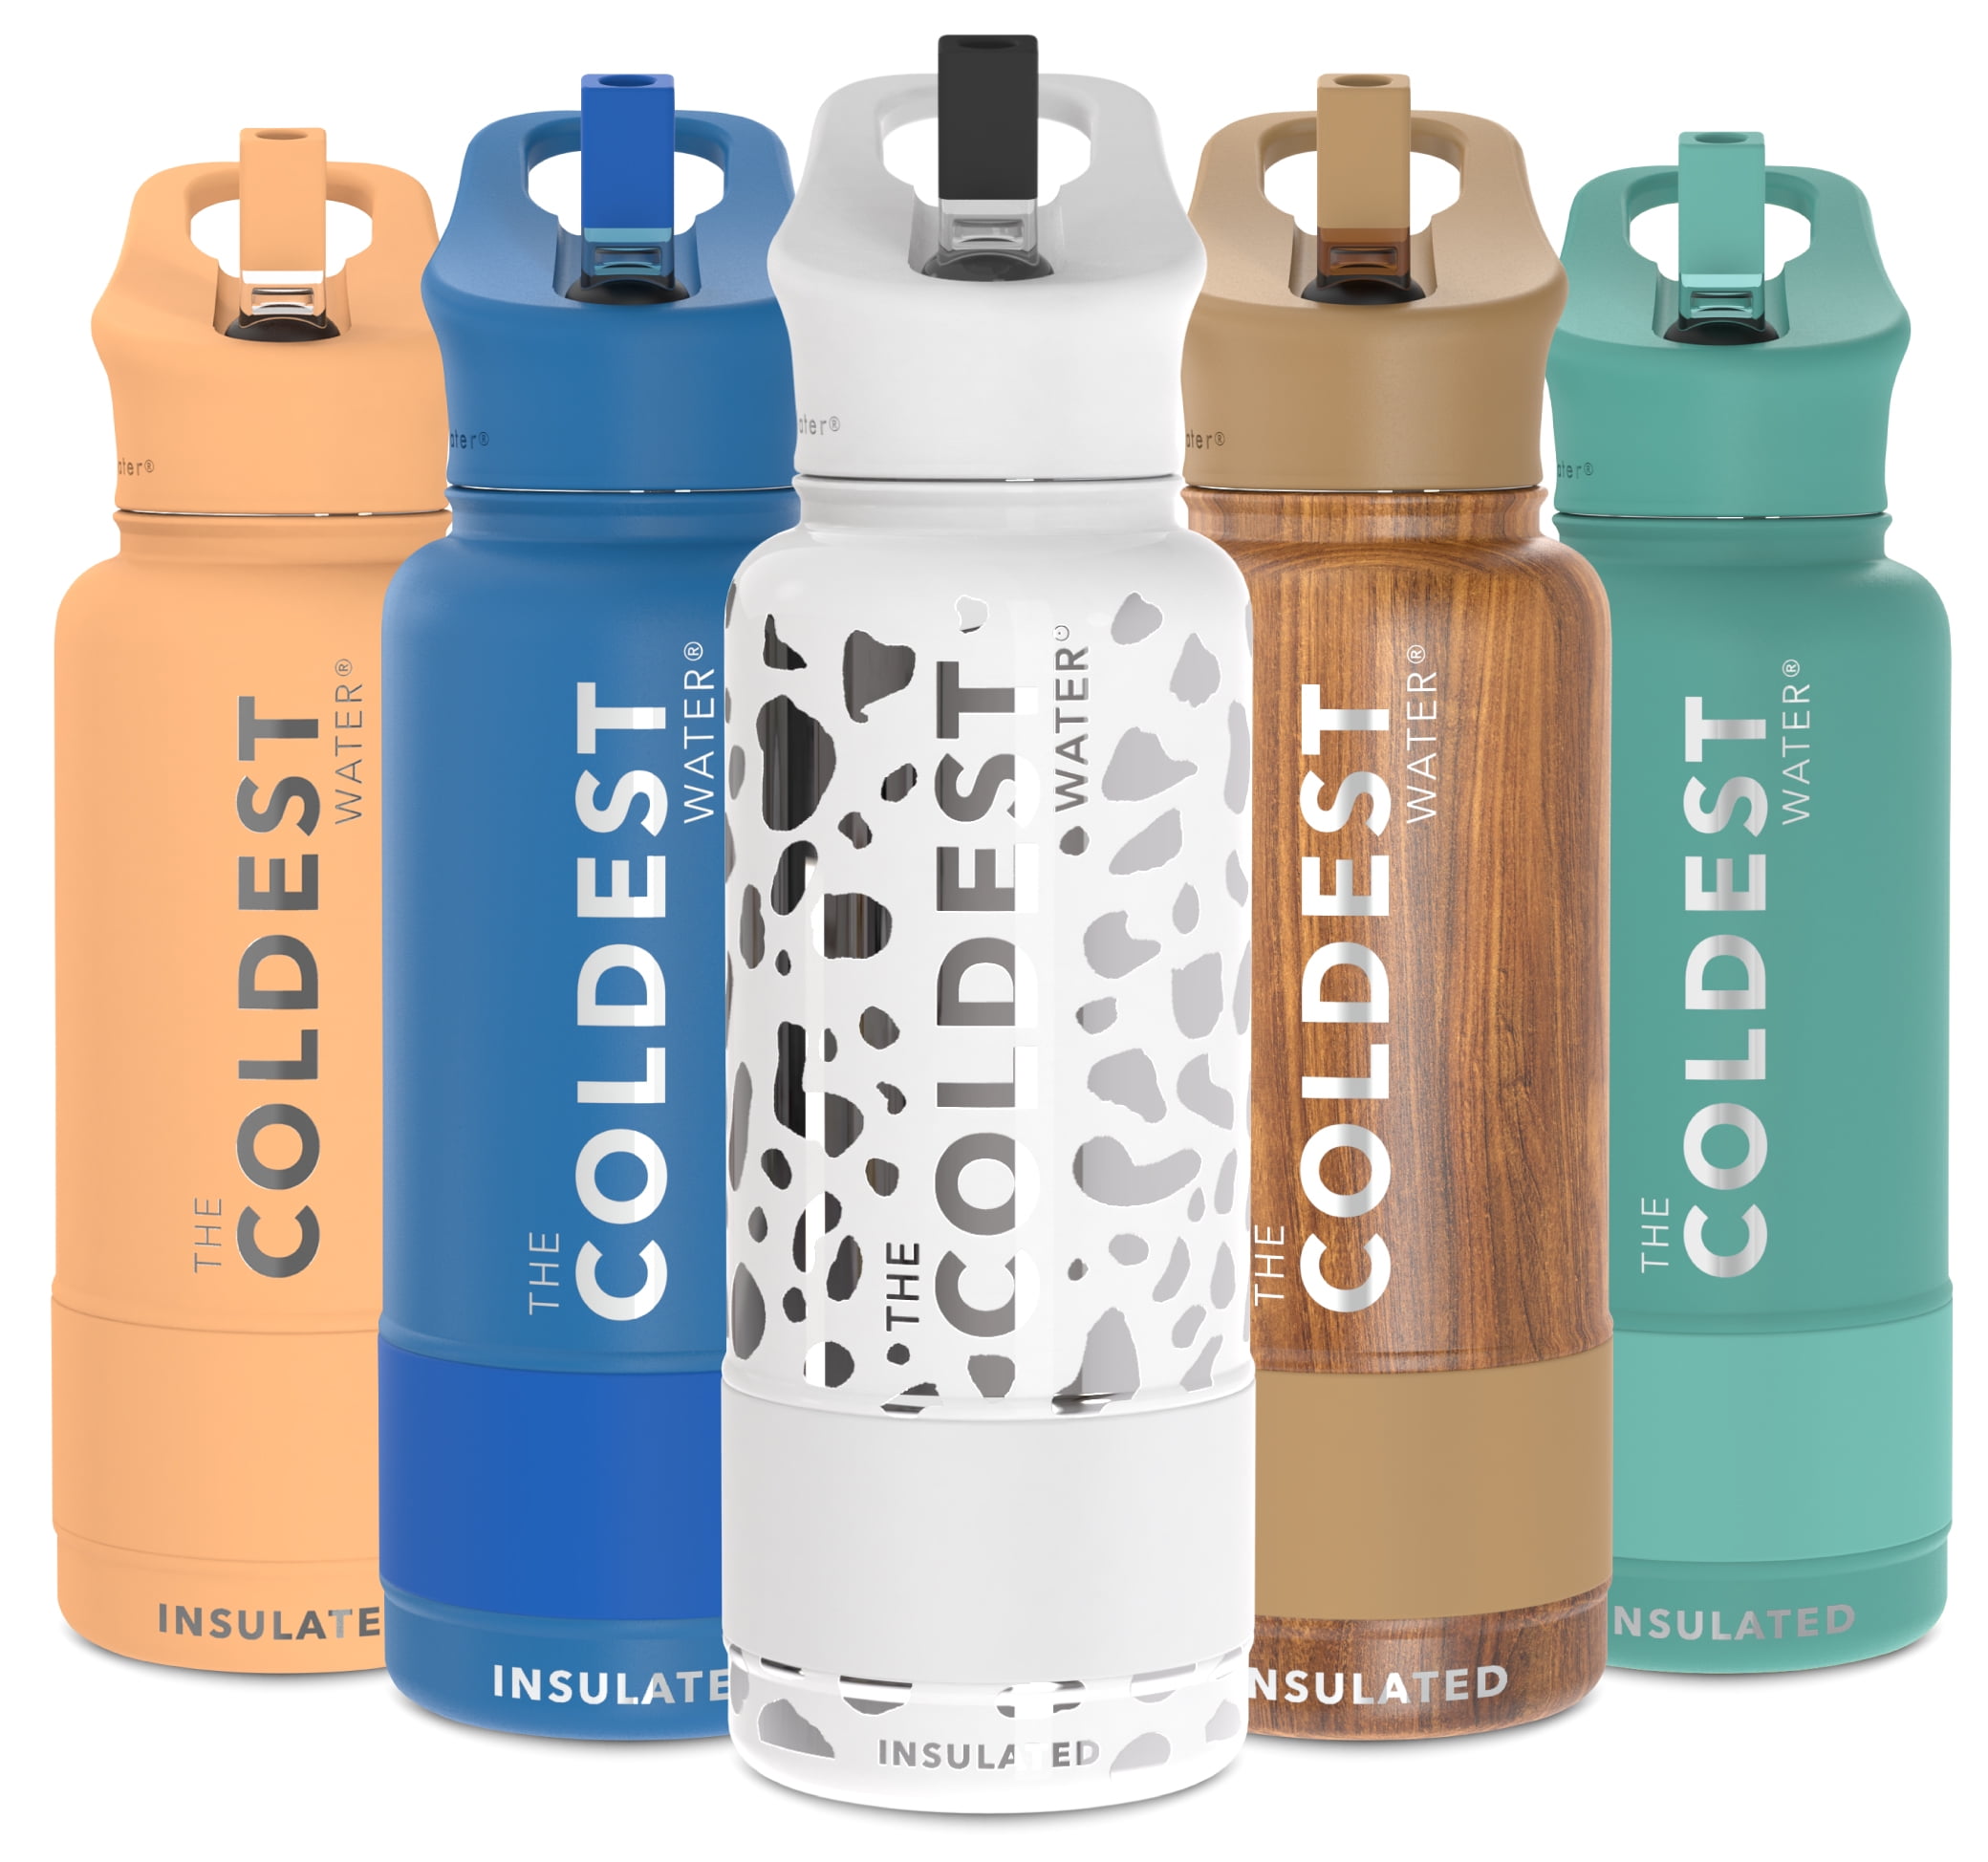 Cool Yoleb 32 oz Insulated Water Bottle with Straw & Spout Lid, Leak Proof  Metal Water Bottles, Stai…See more Cool Yoleb 32 oz Insulated Water Bottle